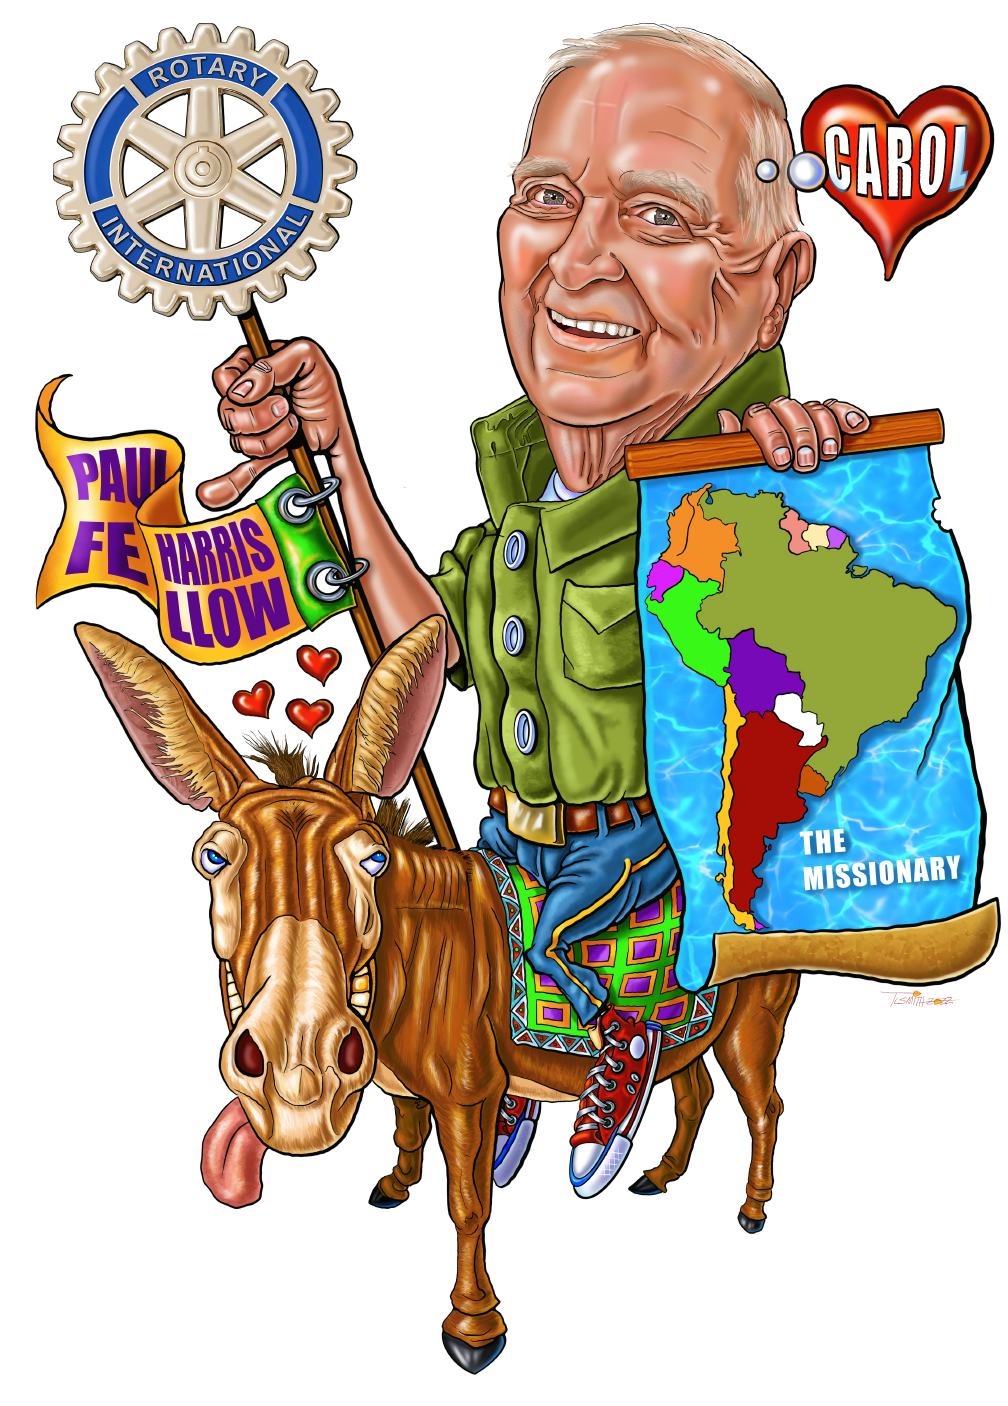 Caricature of a smiling man on a donkey holder a map of South America and a Rotarians staff.